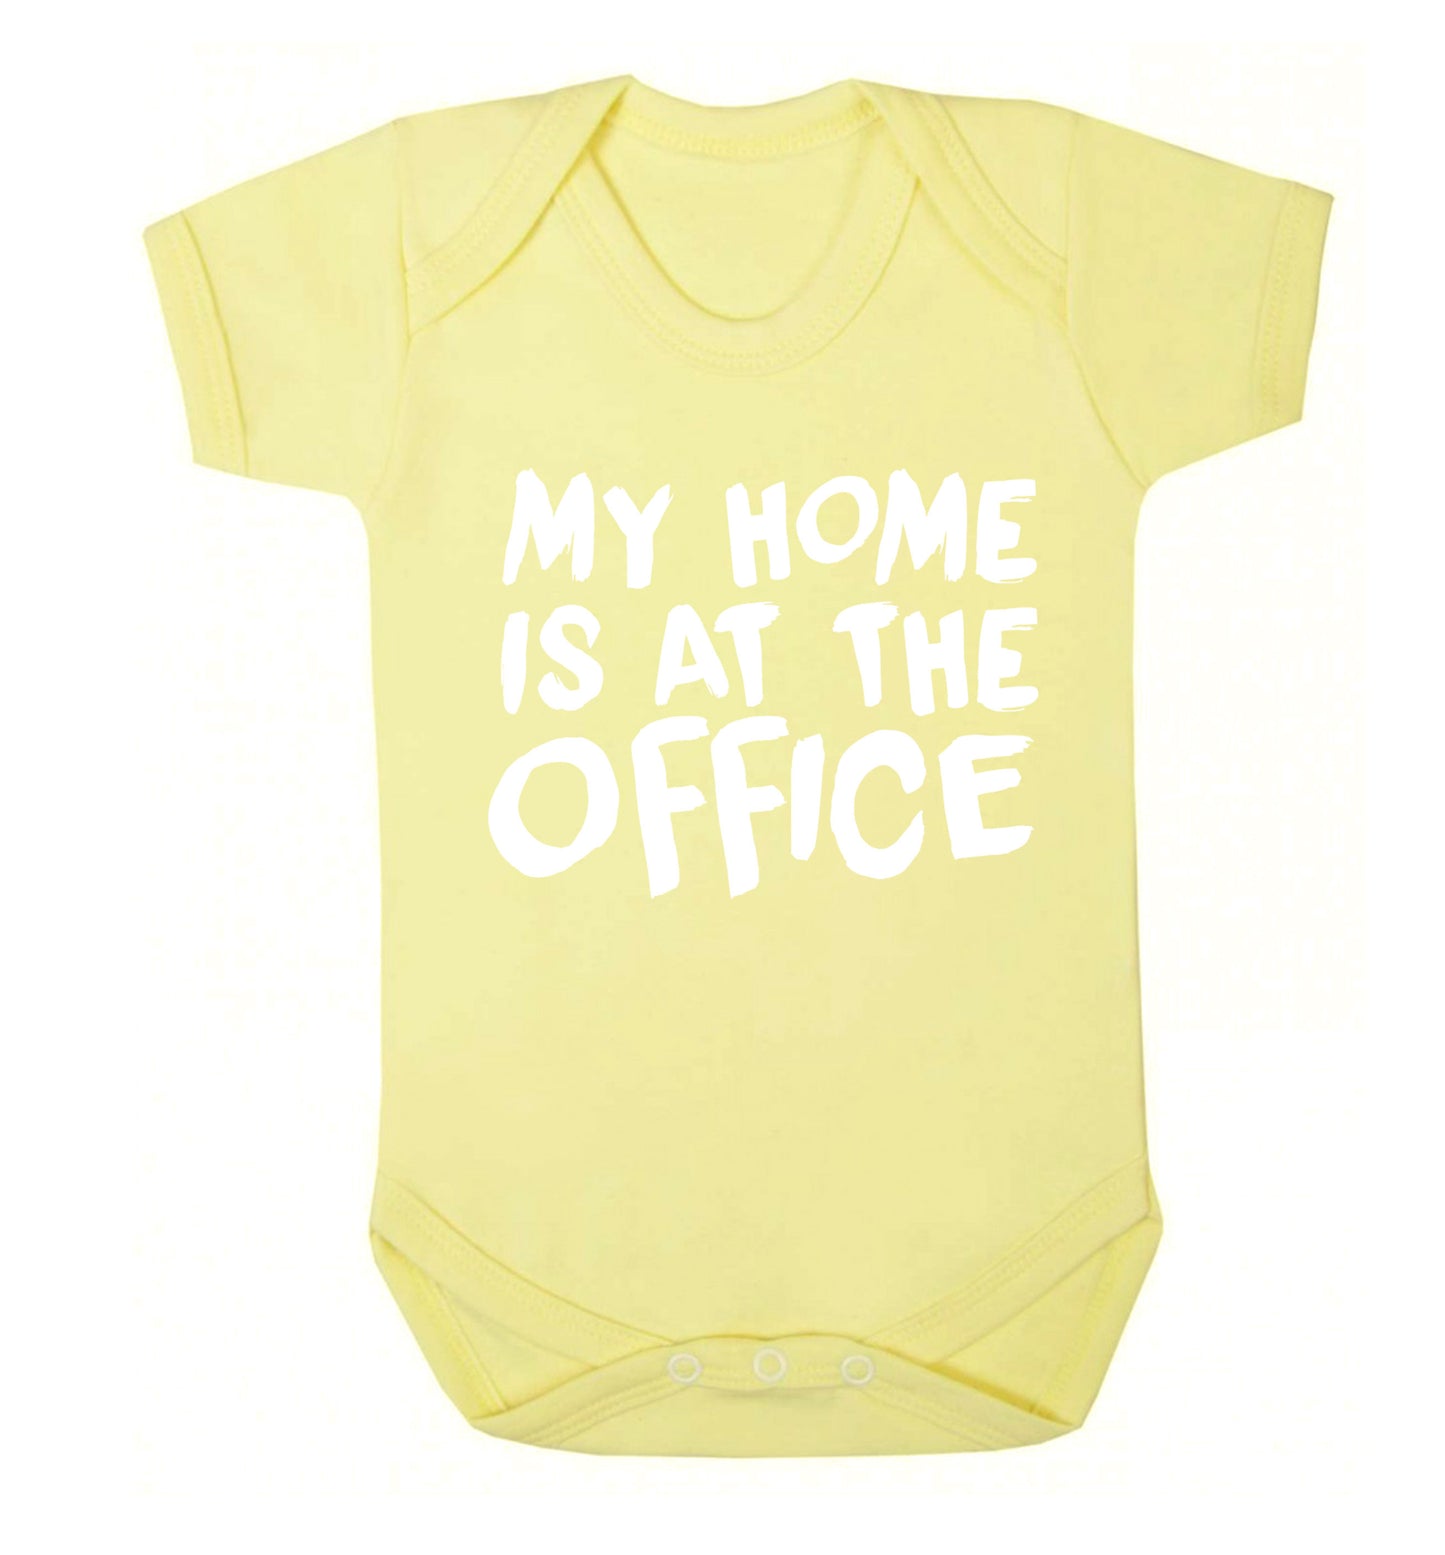 My home is at the office Baby Vest pale yellow 18-24 months